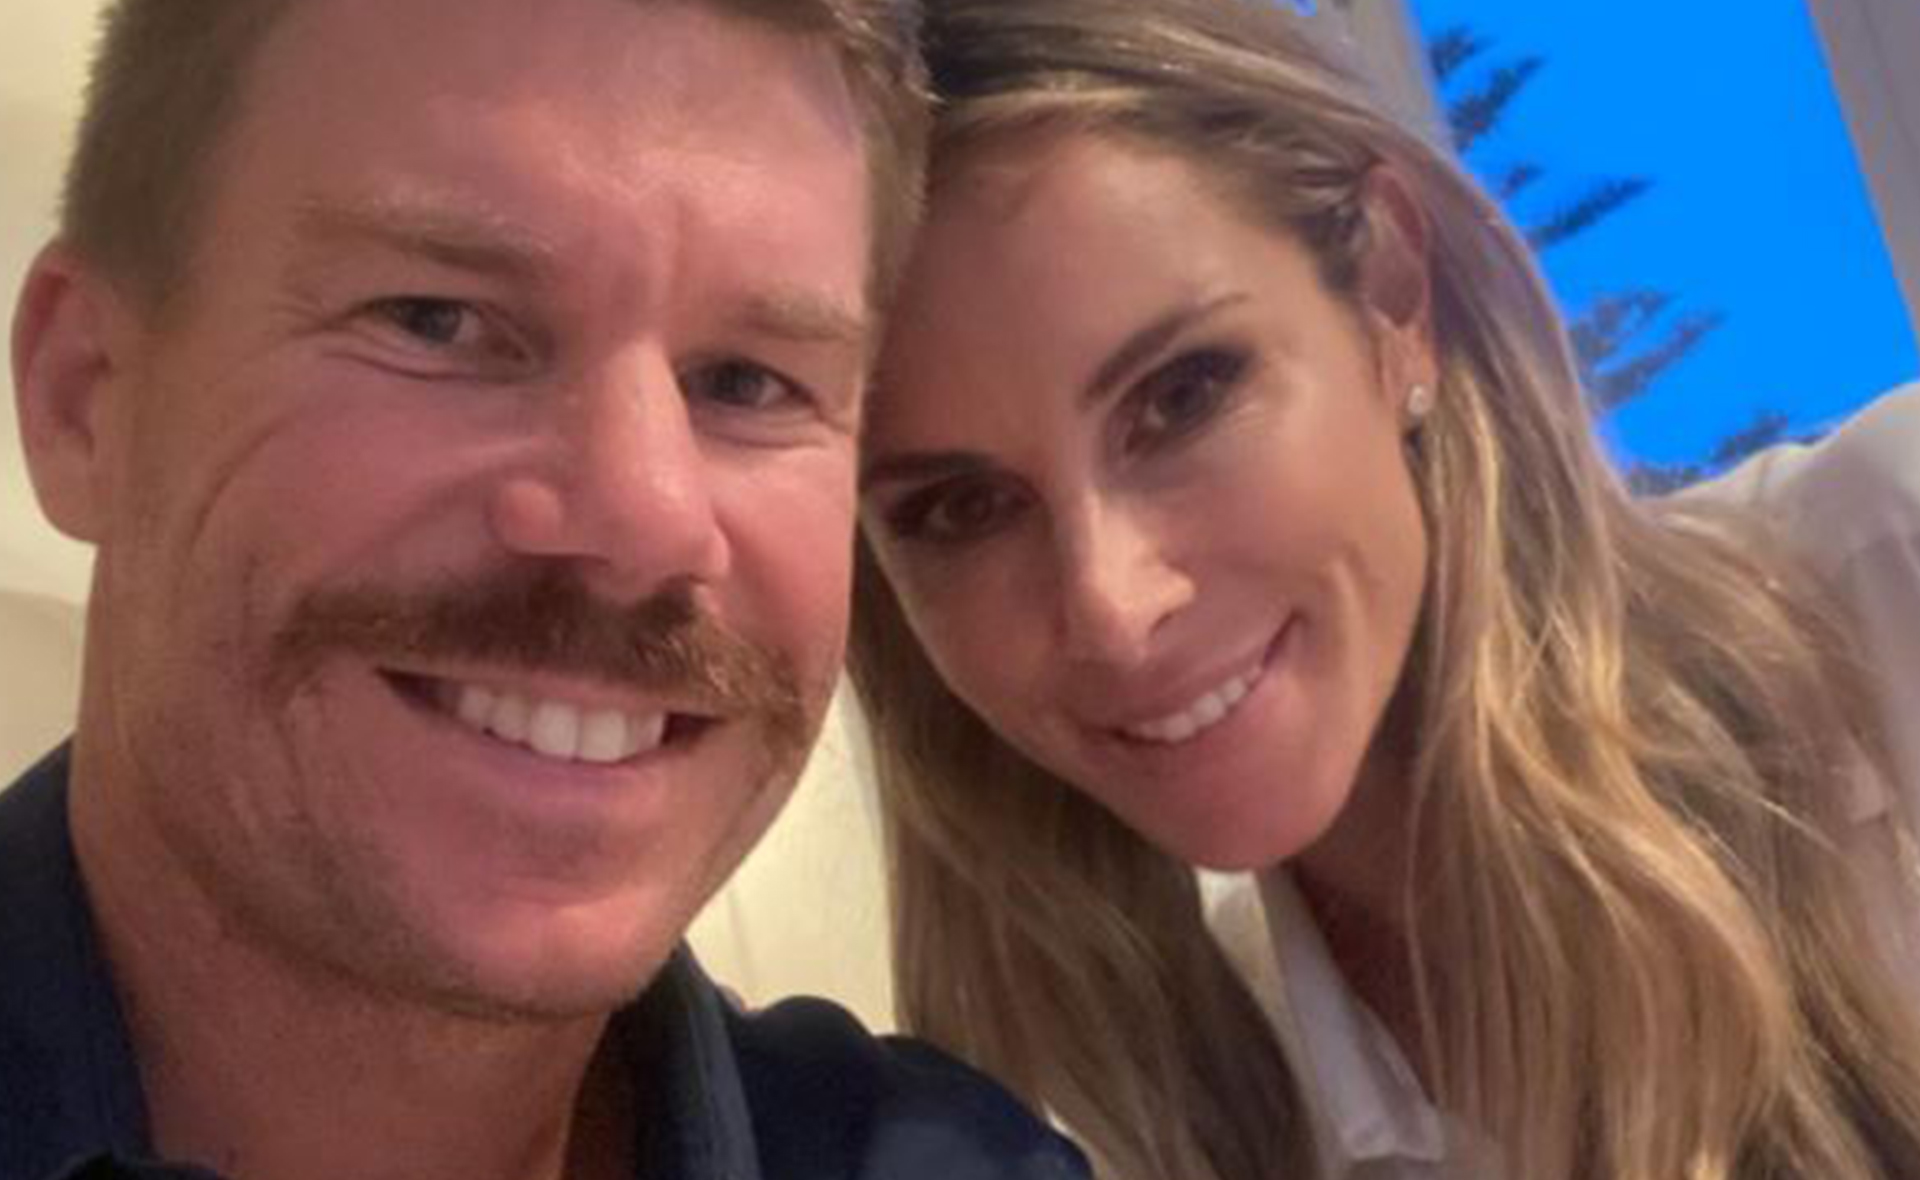 Cricketer David Warner shares an emotional update about his wife Candice Warner after being trapped in India